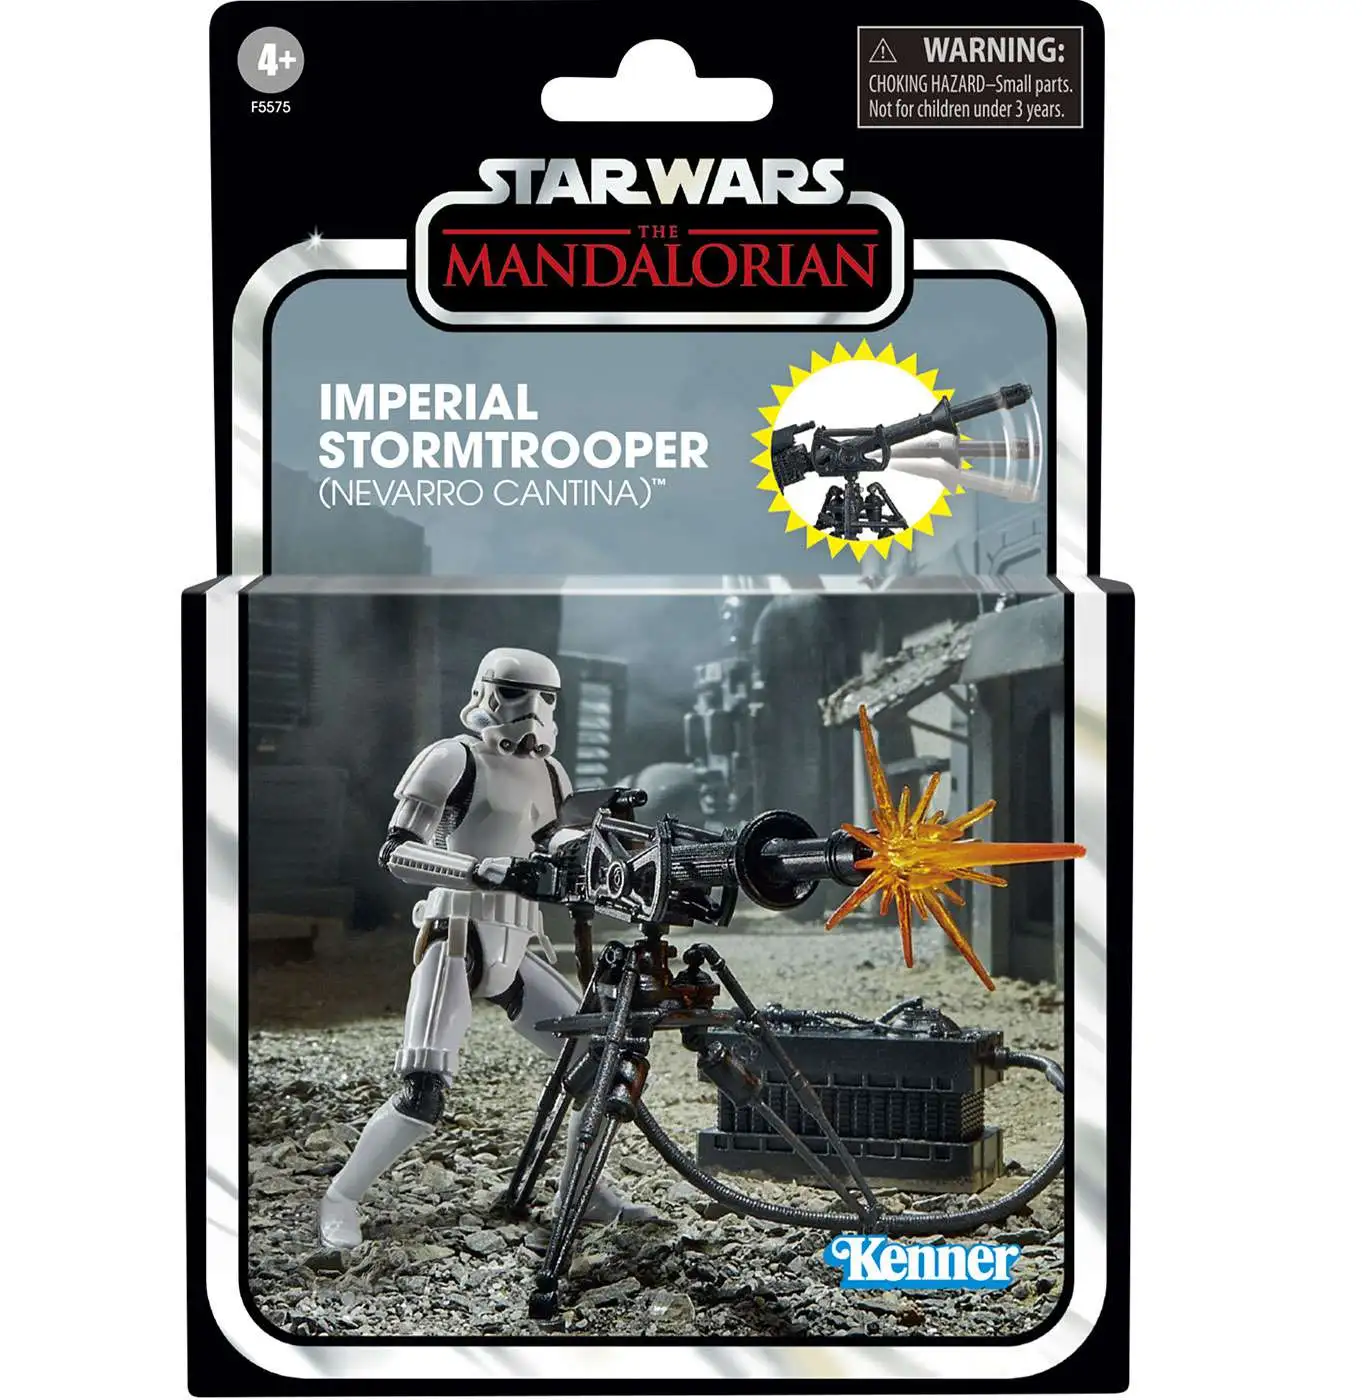 Star Wars The Mandalorian Vintage Collection Imperial Stormtrooper (Nevarro Cantina) Deluxe Action Figure (Pre-Order ships August)